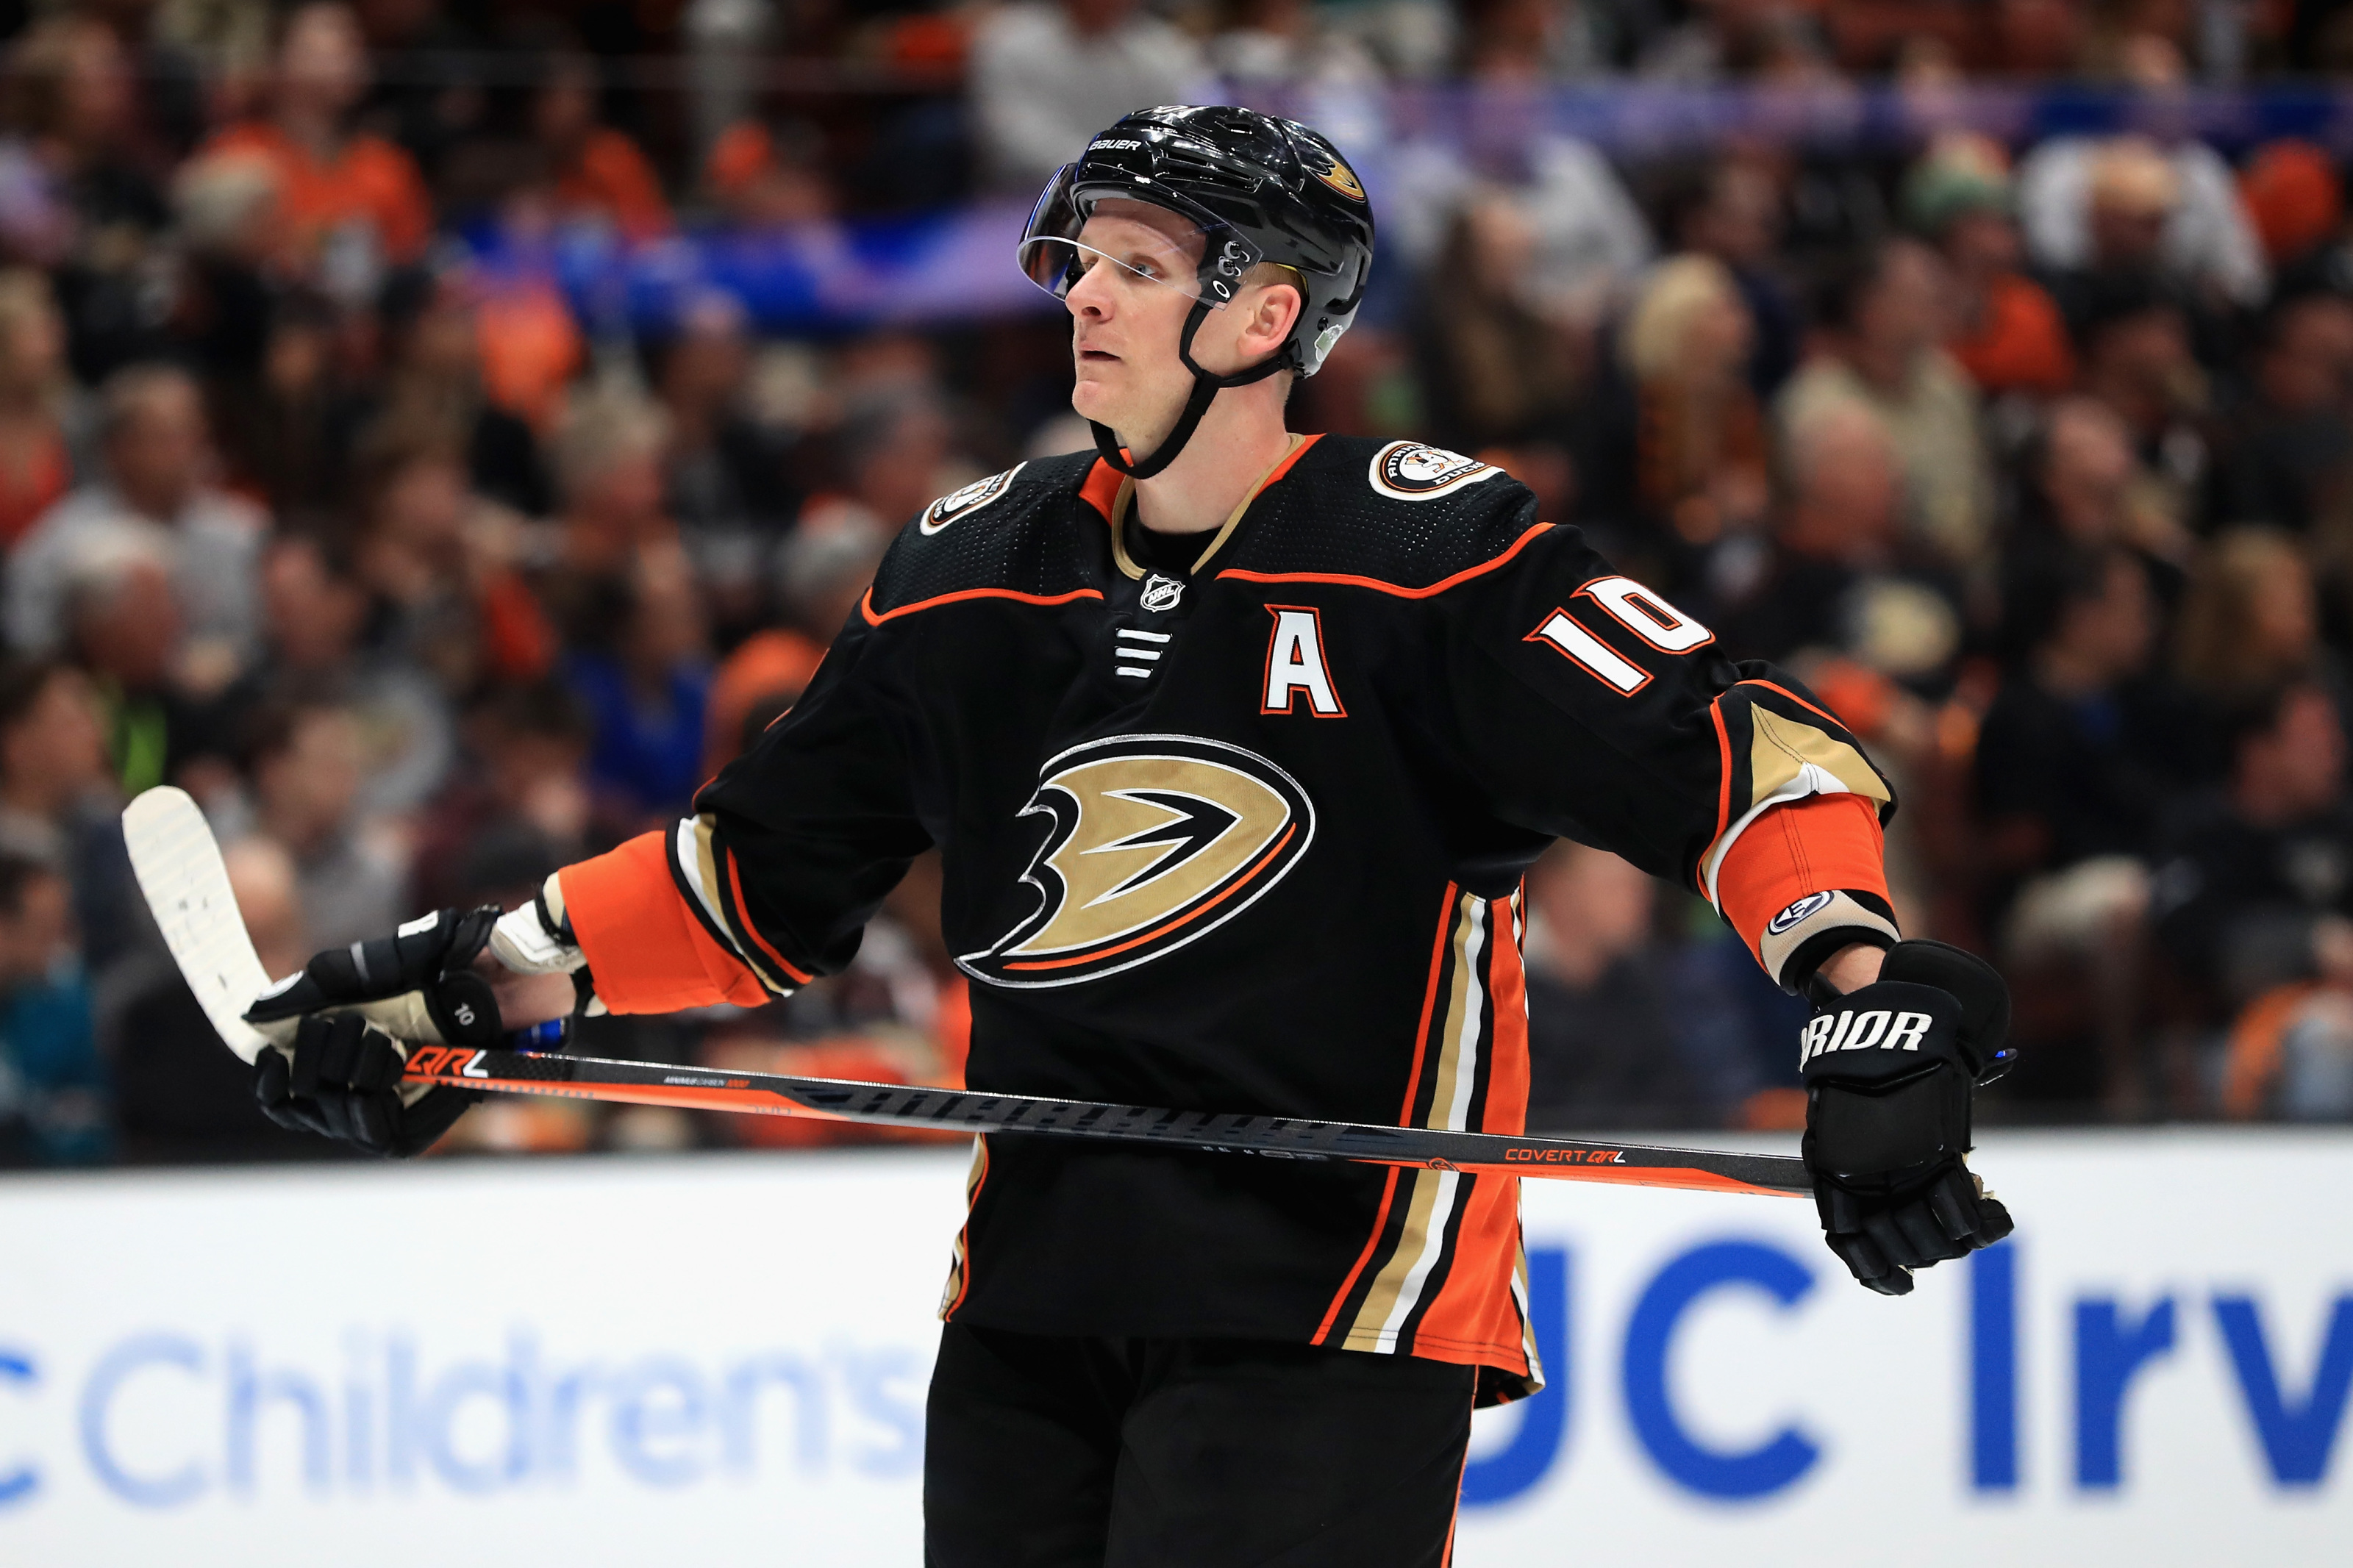 Corey Perry was with the team during their Stanley Cup run